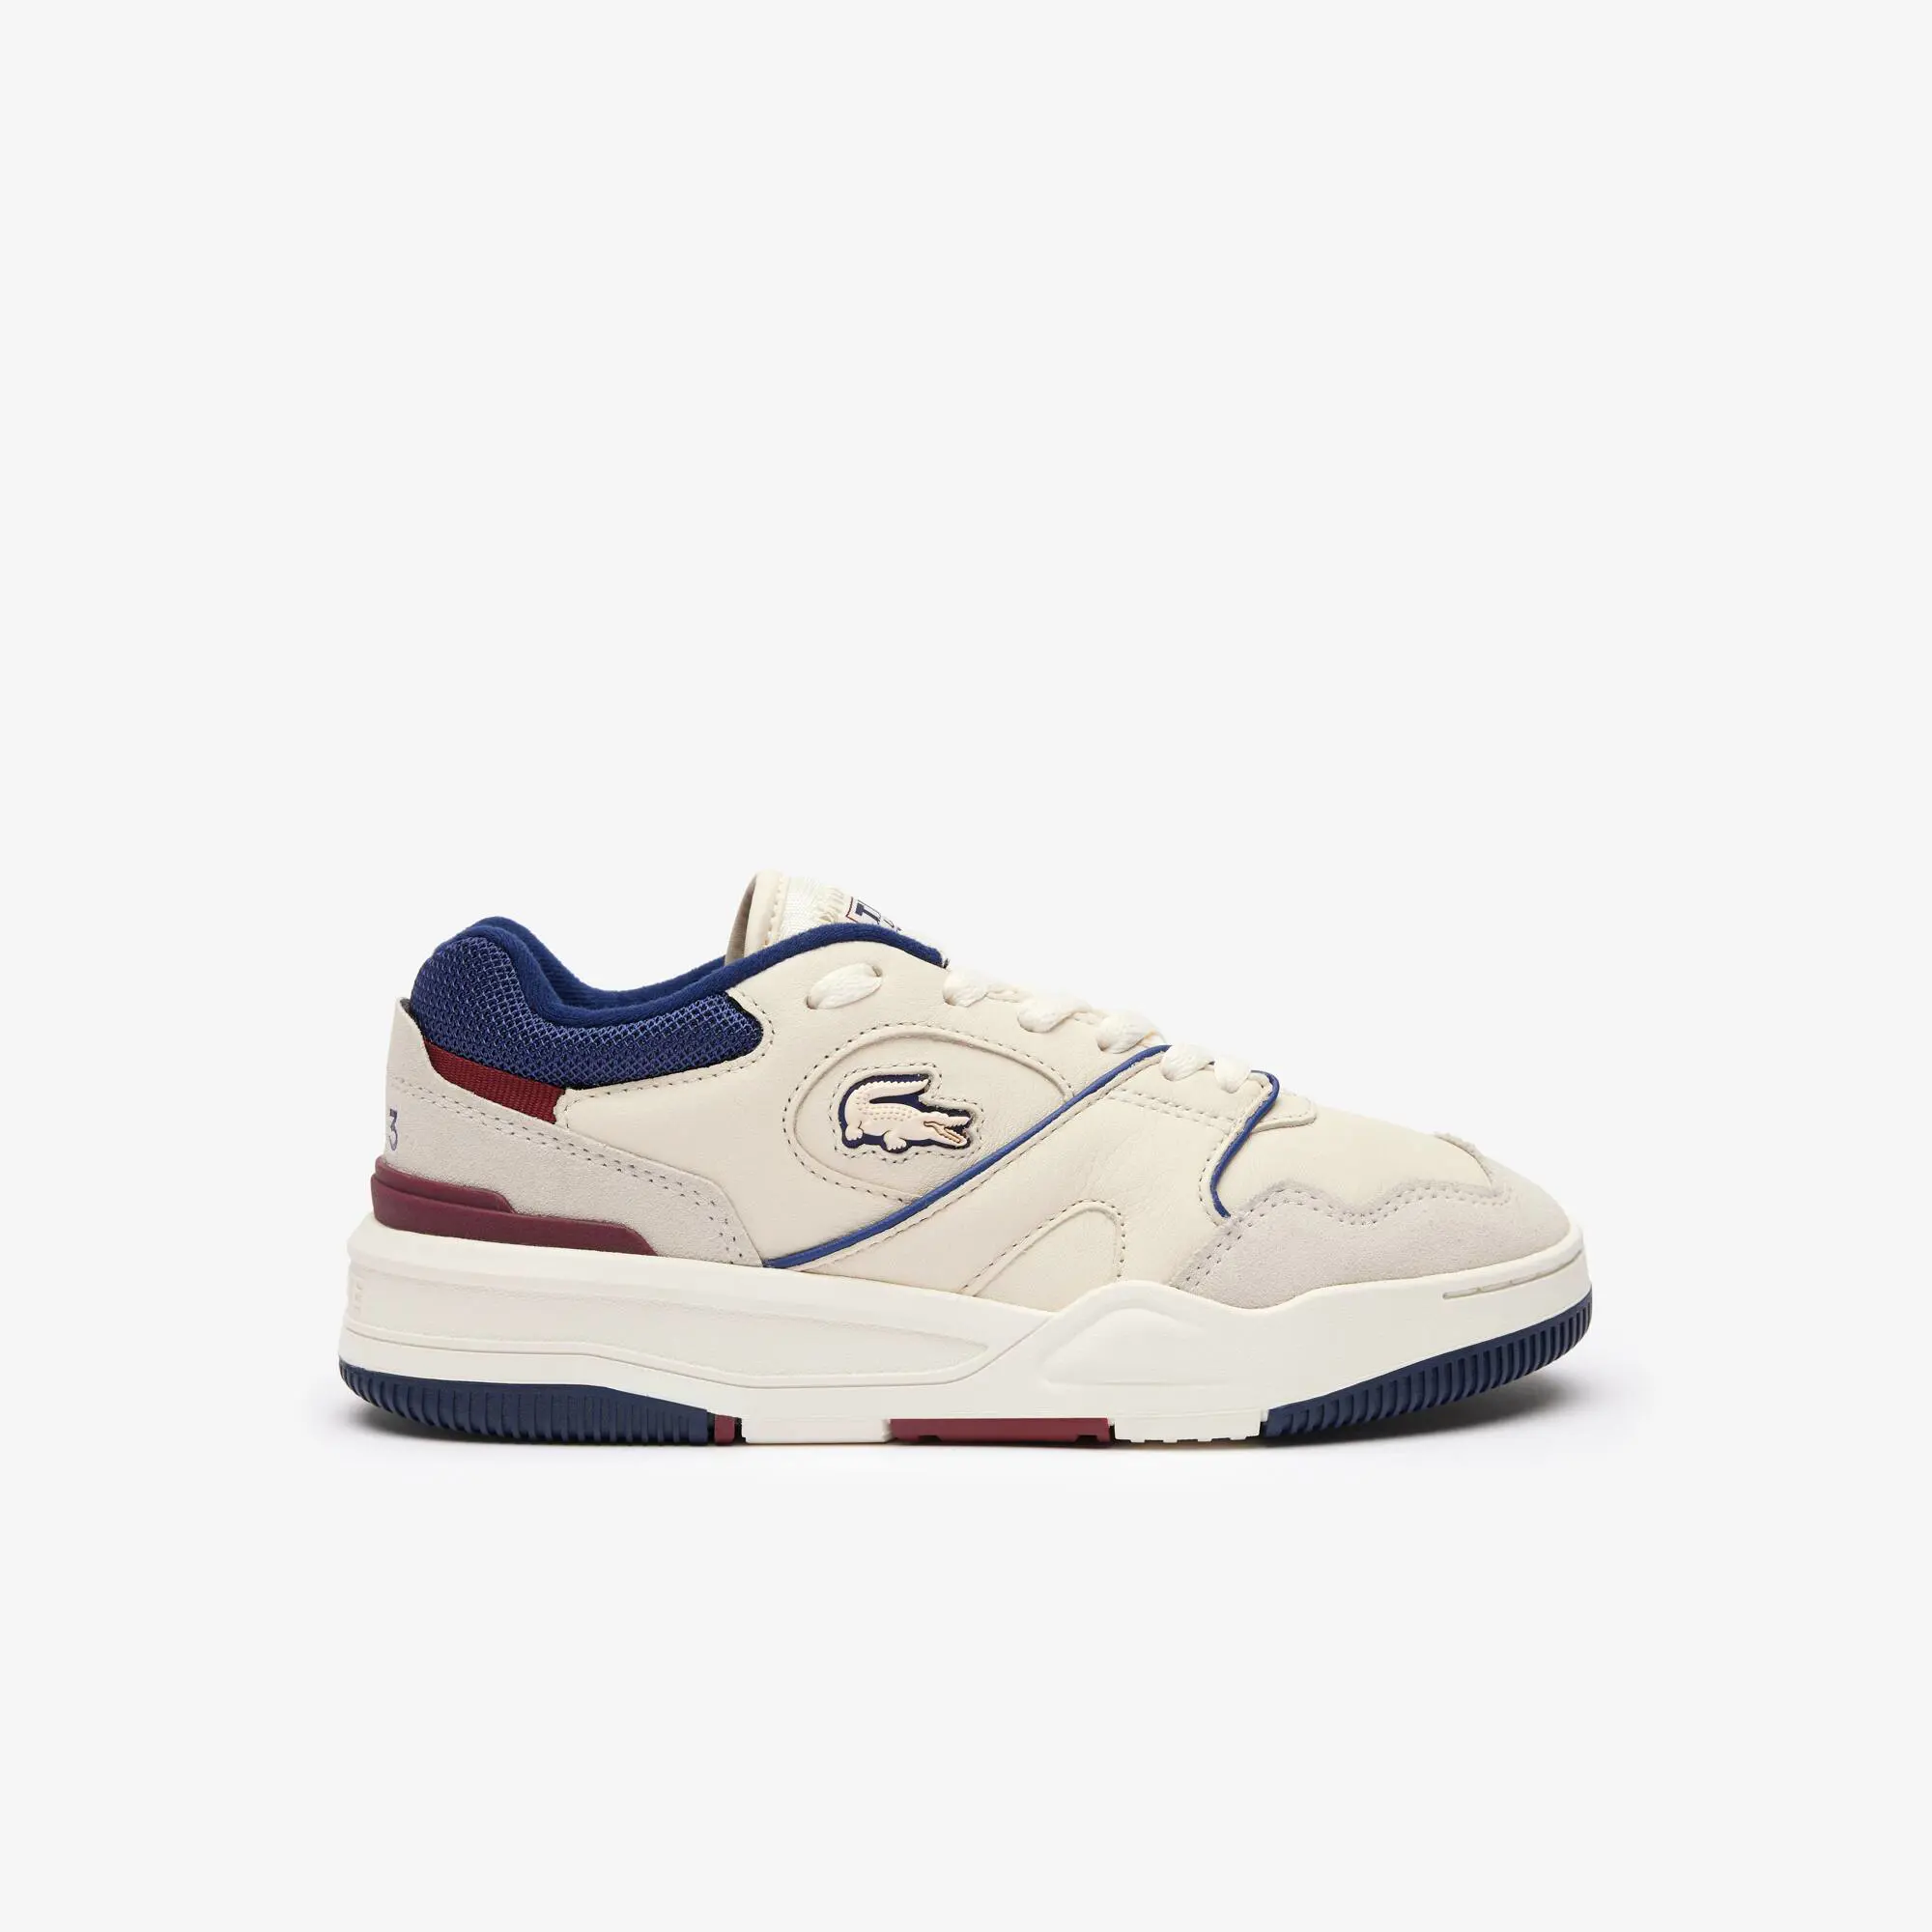 Lacoste Women’s Lineshot Mesh Collar Leather Sneakers. 1